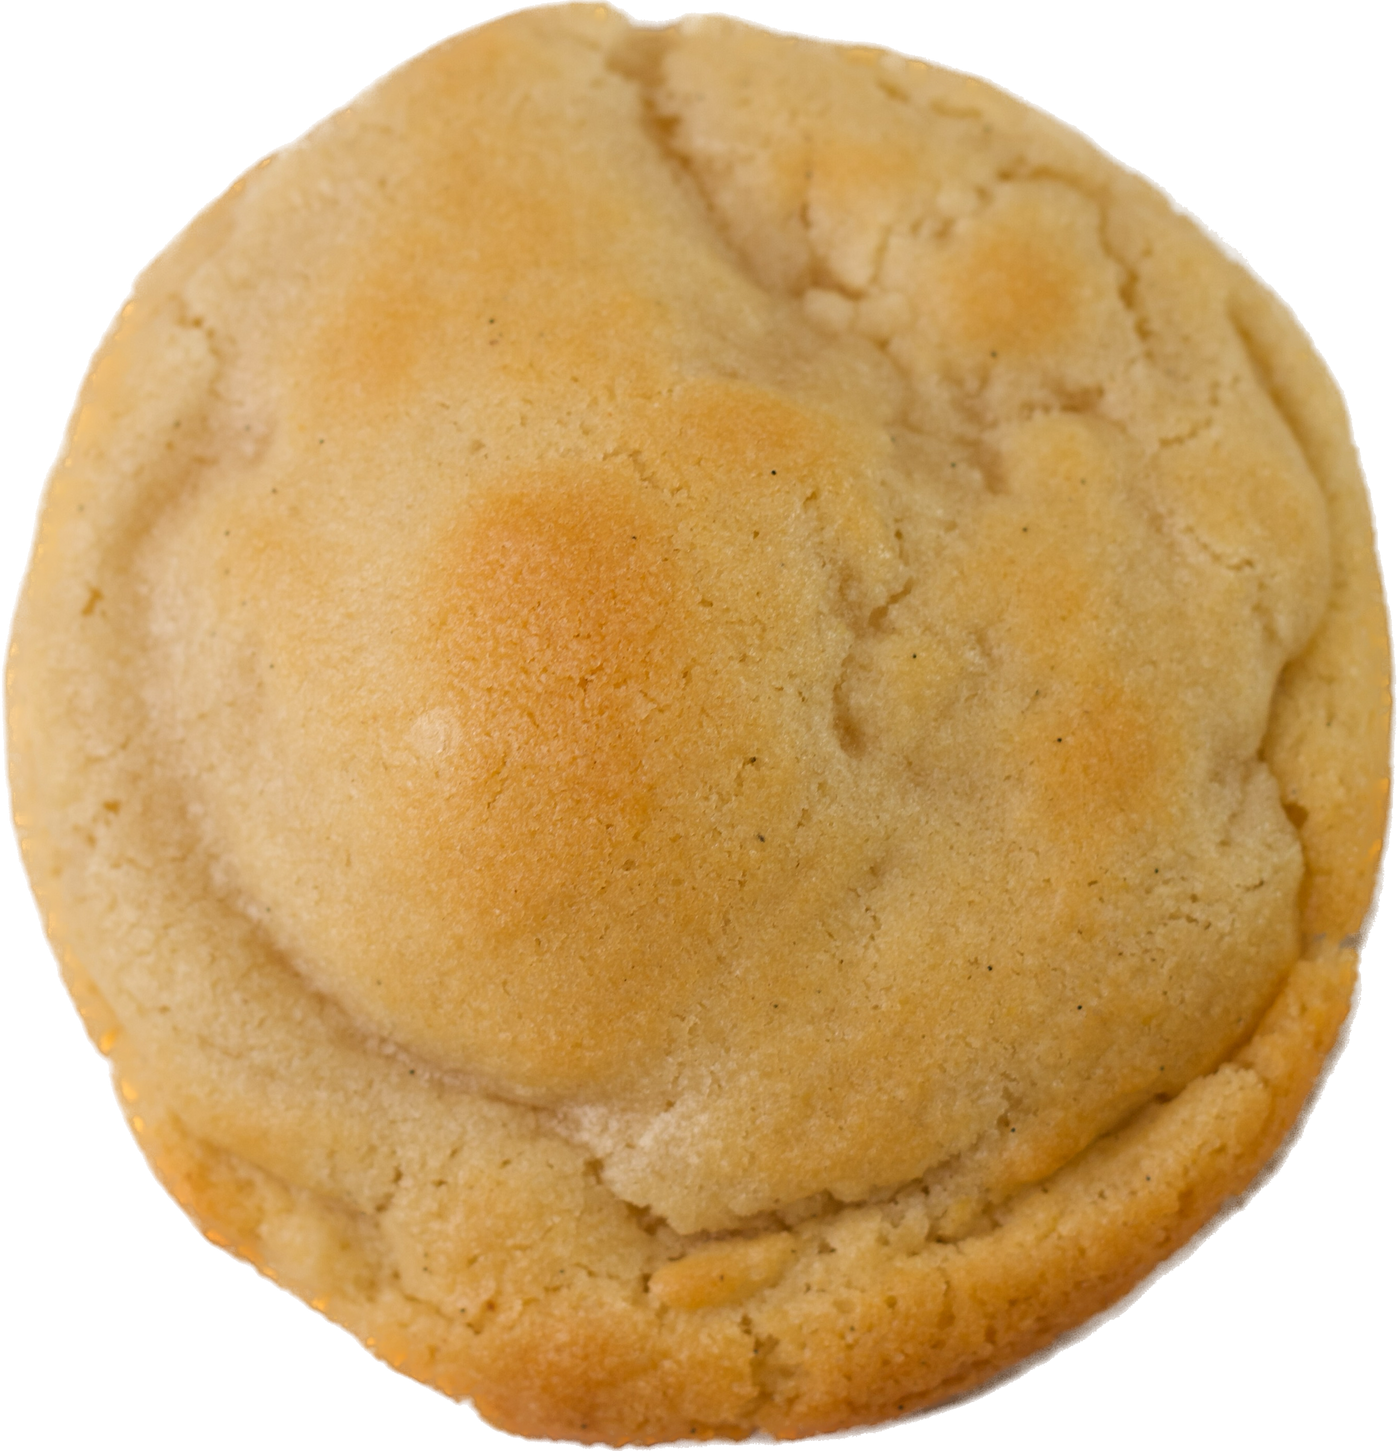 A single vanilla sugar bean cookie from Bake the Cookie Shoppe